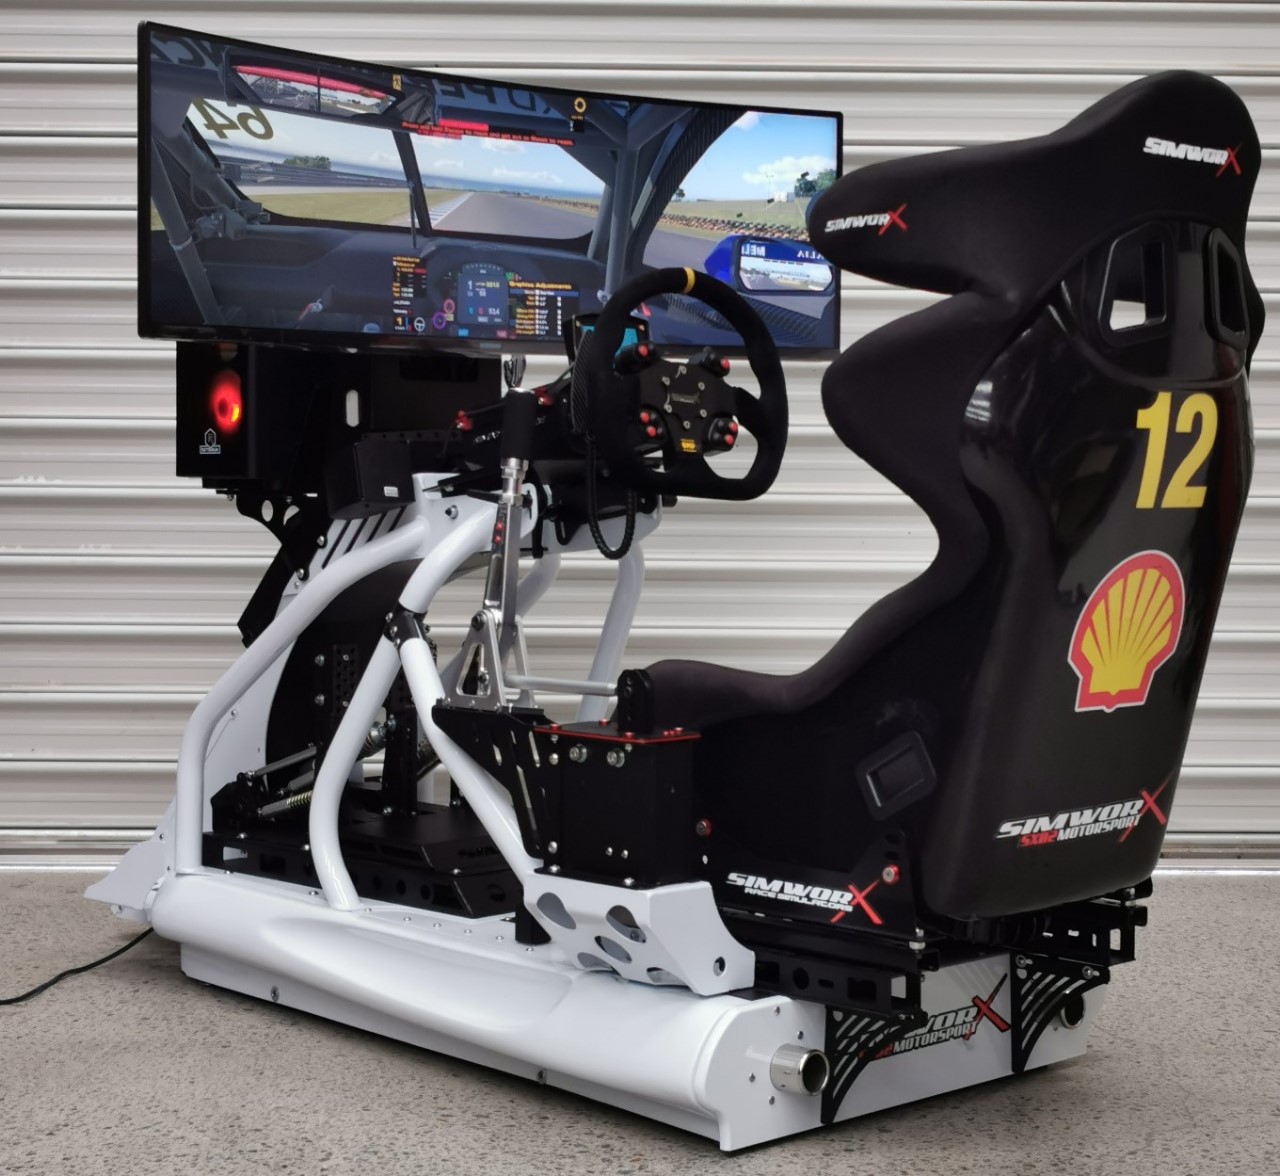 The Simworx SX02Msport Simulator that Fabian Coulthard will use to compete in the Supercars Eseries